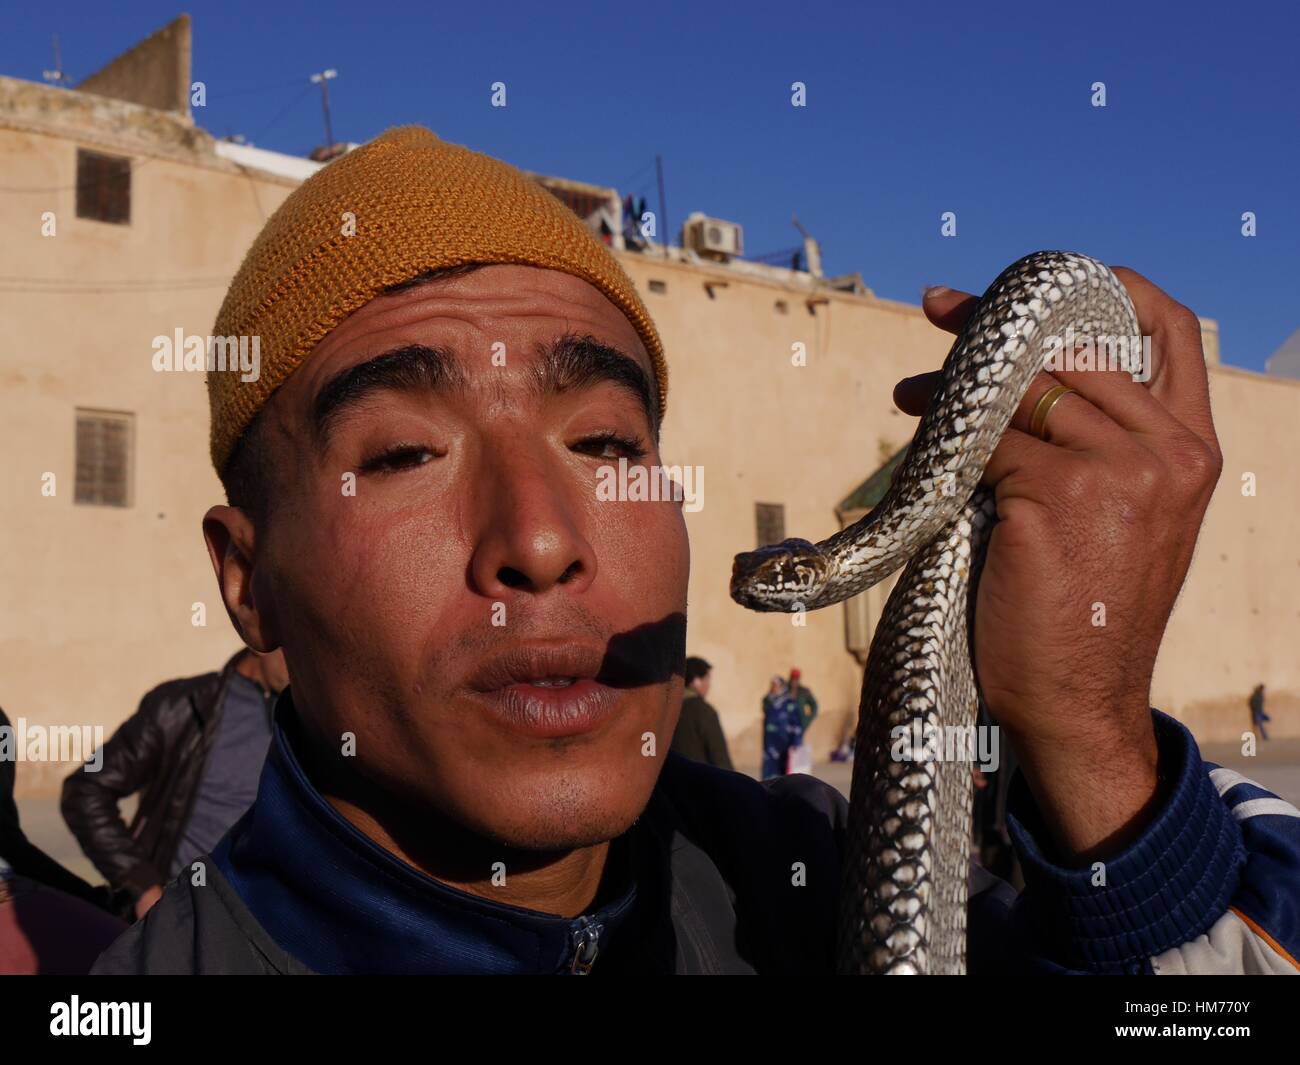 Close up portrait of Moroccan snake charmer holding snake close to his face in Place-el-Hedime, main square of the imperial city of Meknes, Morocco Stock Photo